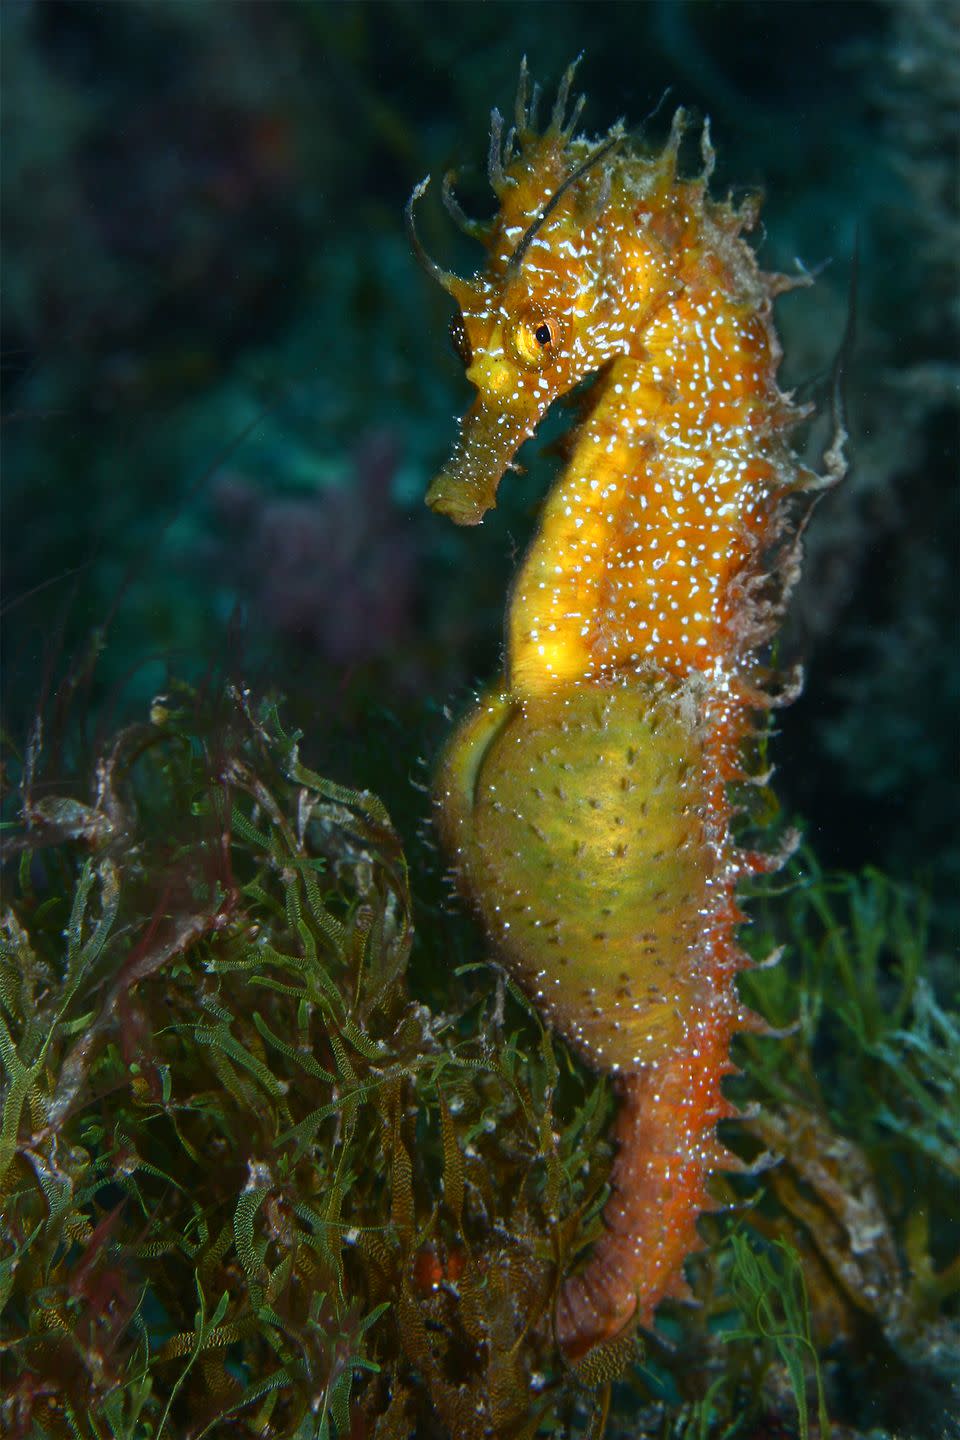 22. Male seahorses get pregnant and give birth.